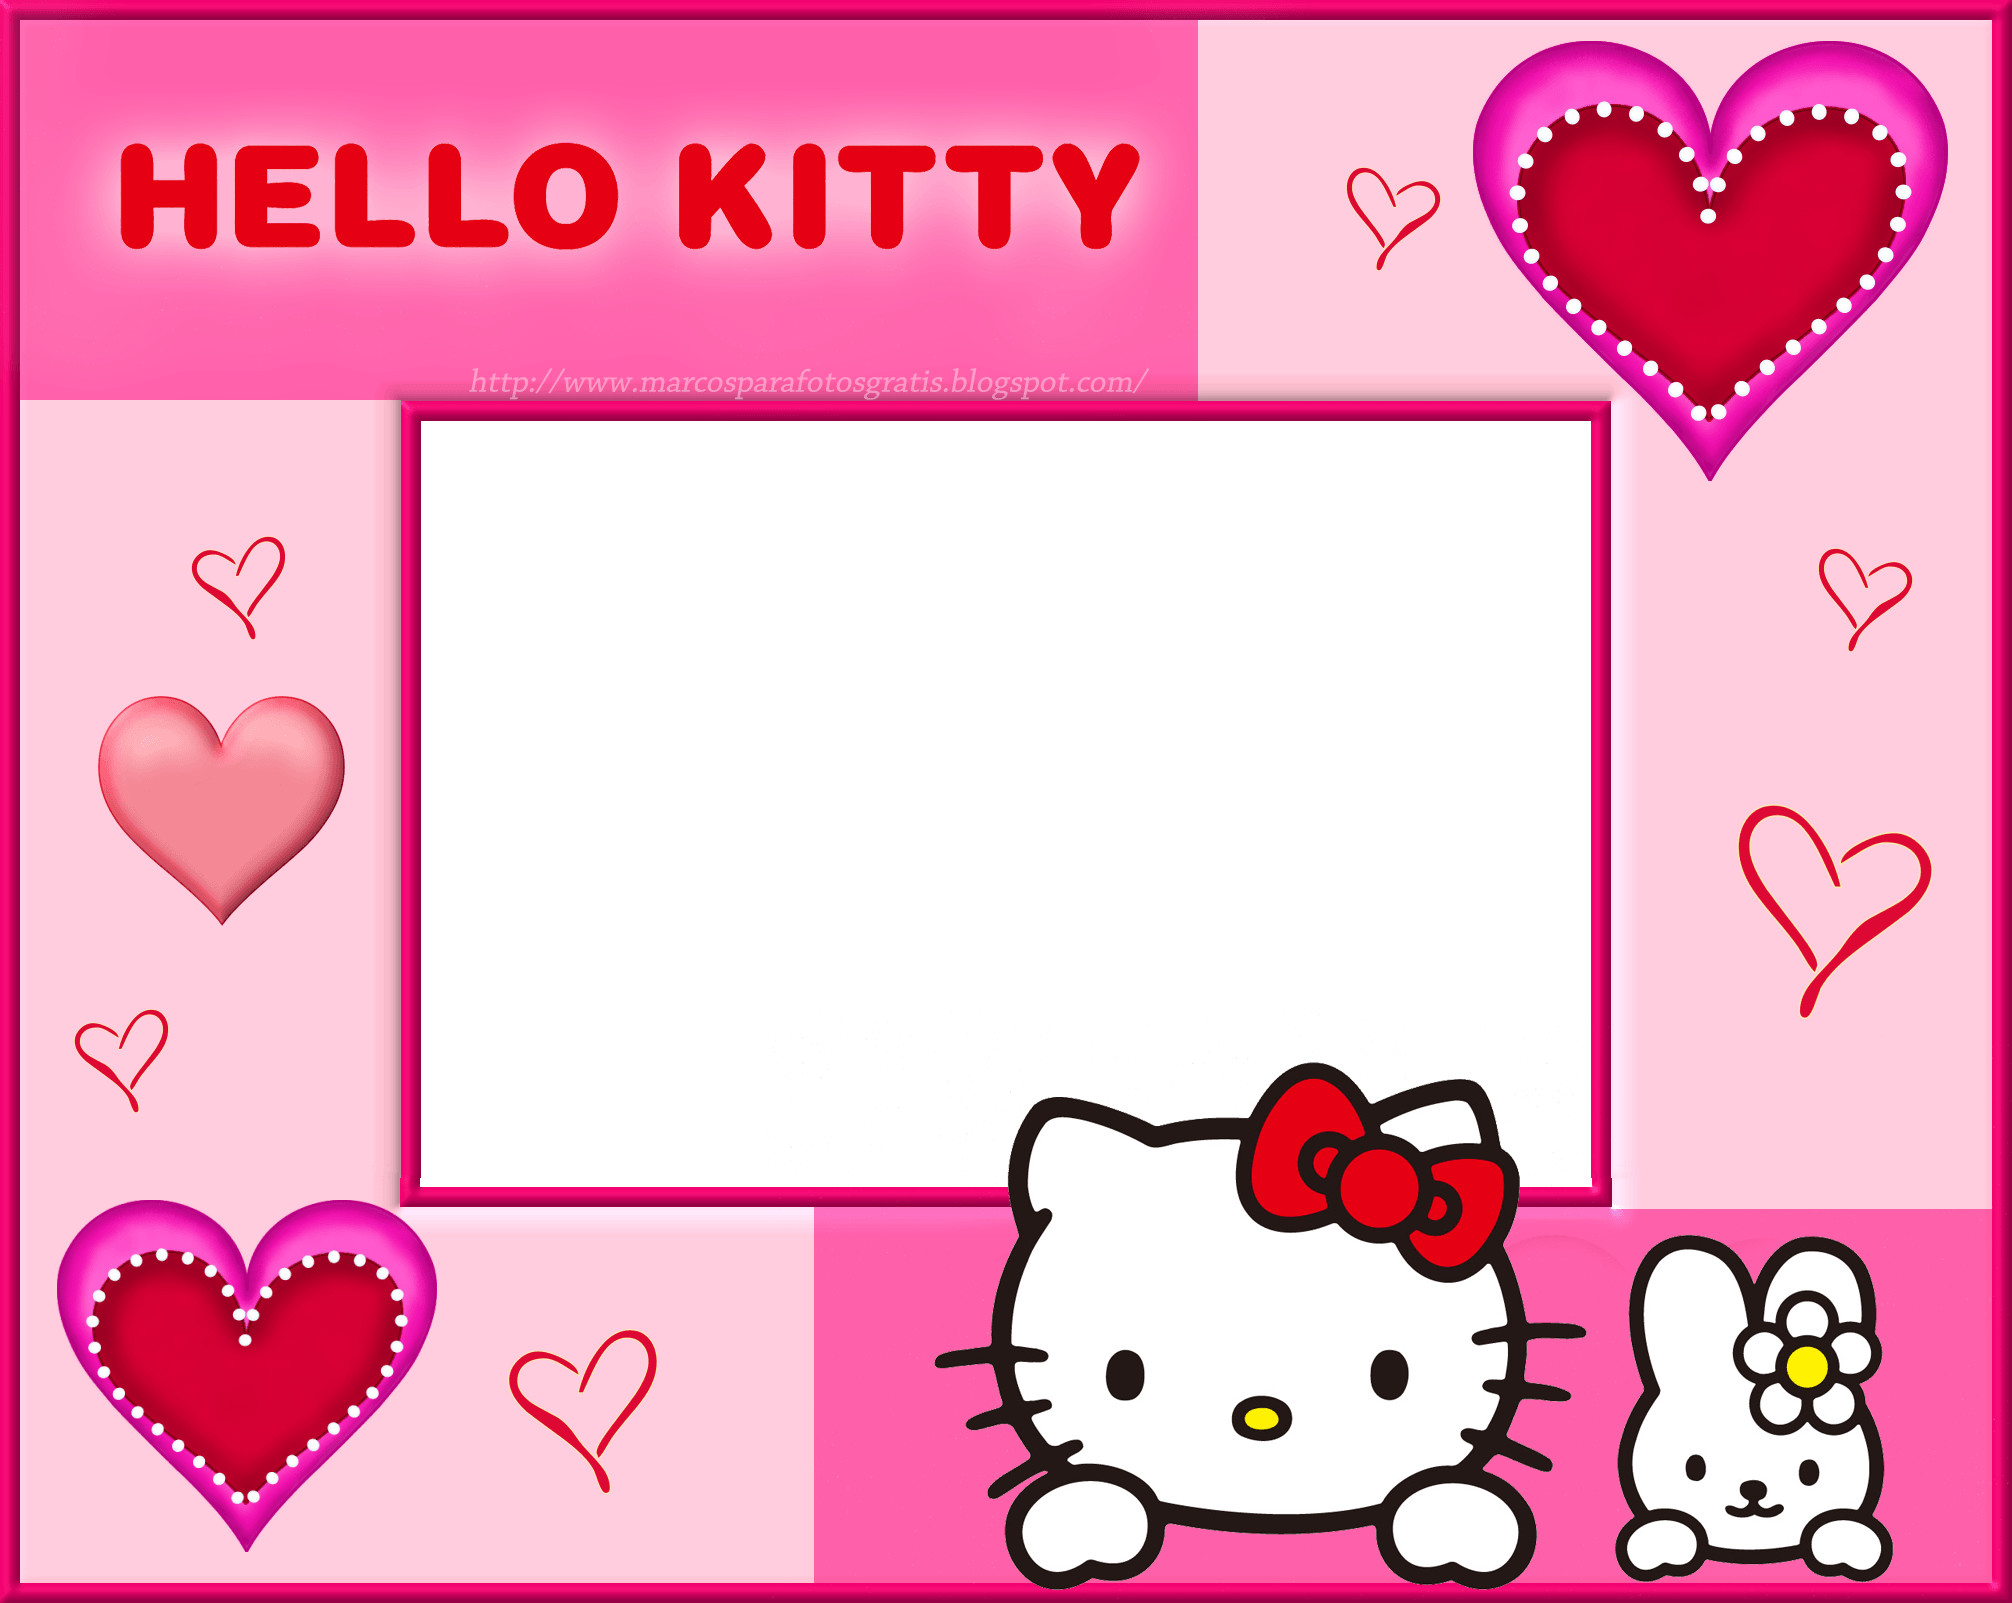 2012x1603 HD Hello Kitty Images Wallpaper #10190 Wallpaper | High Definition .